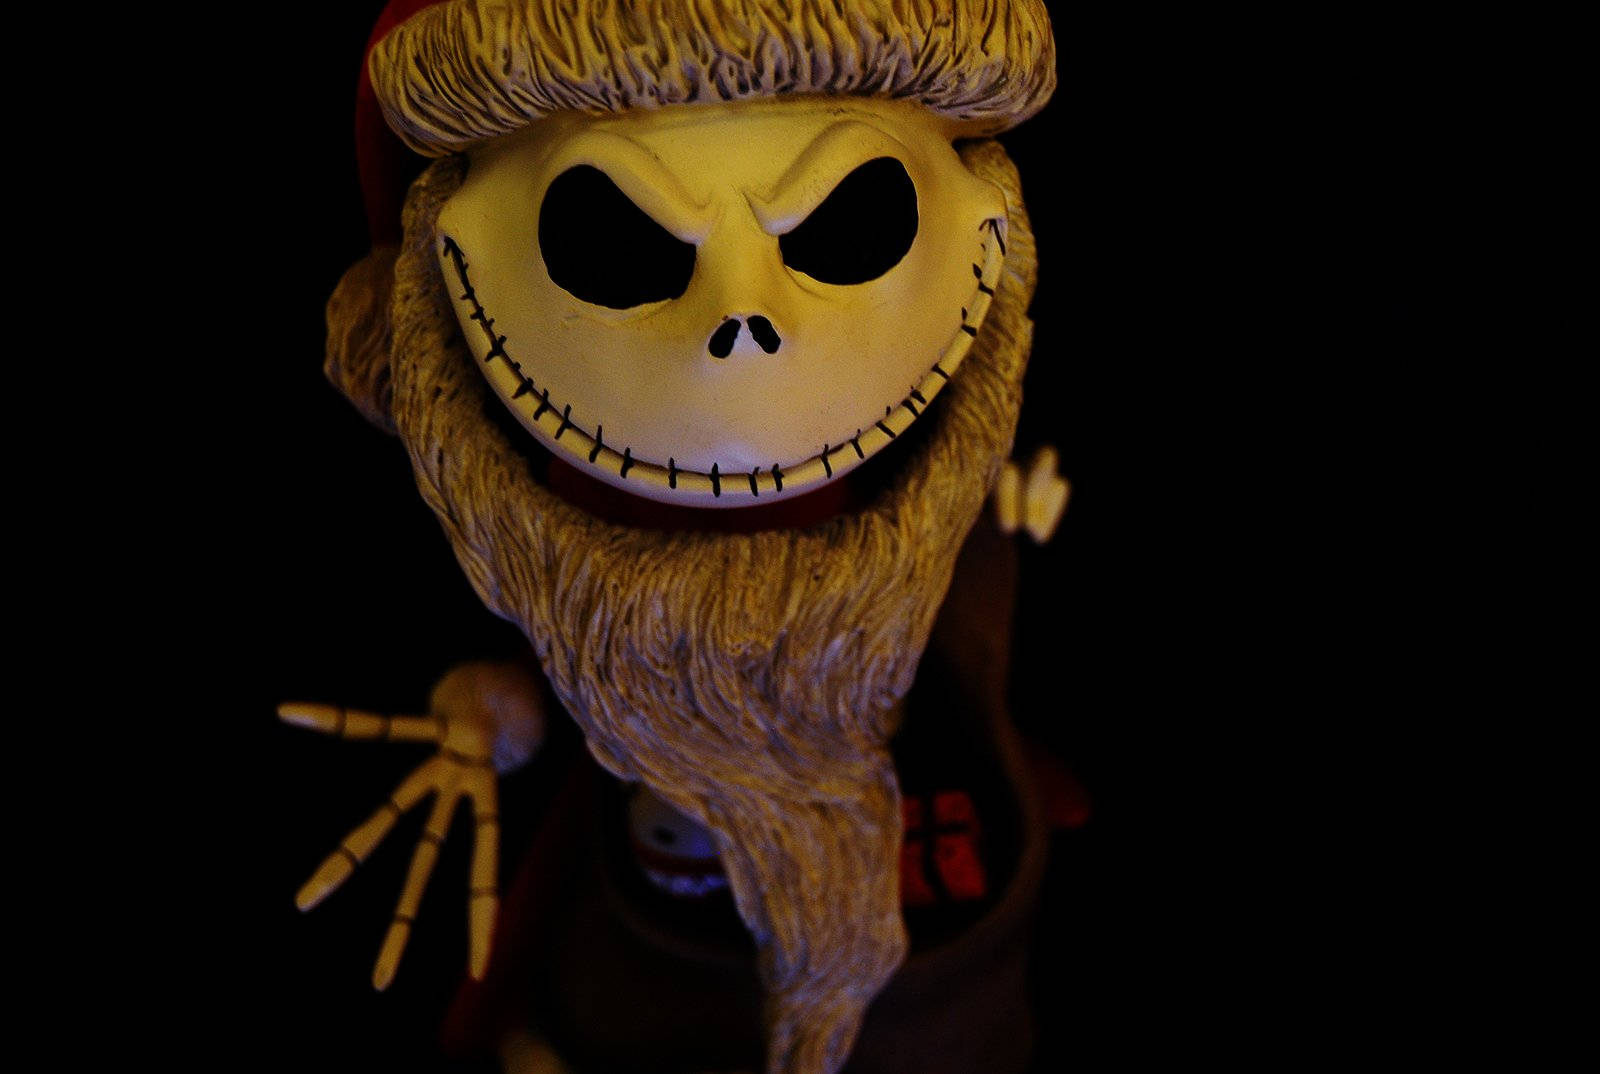 A Skeleton Figurine With A Hat And Beard Wallpaper